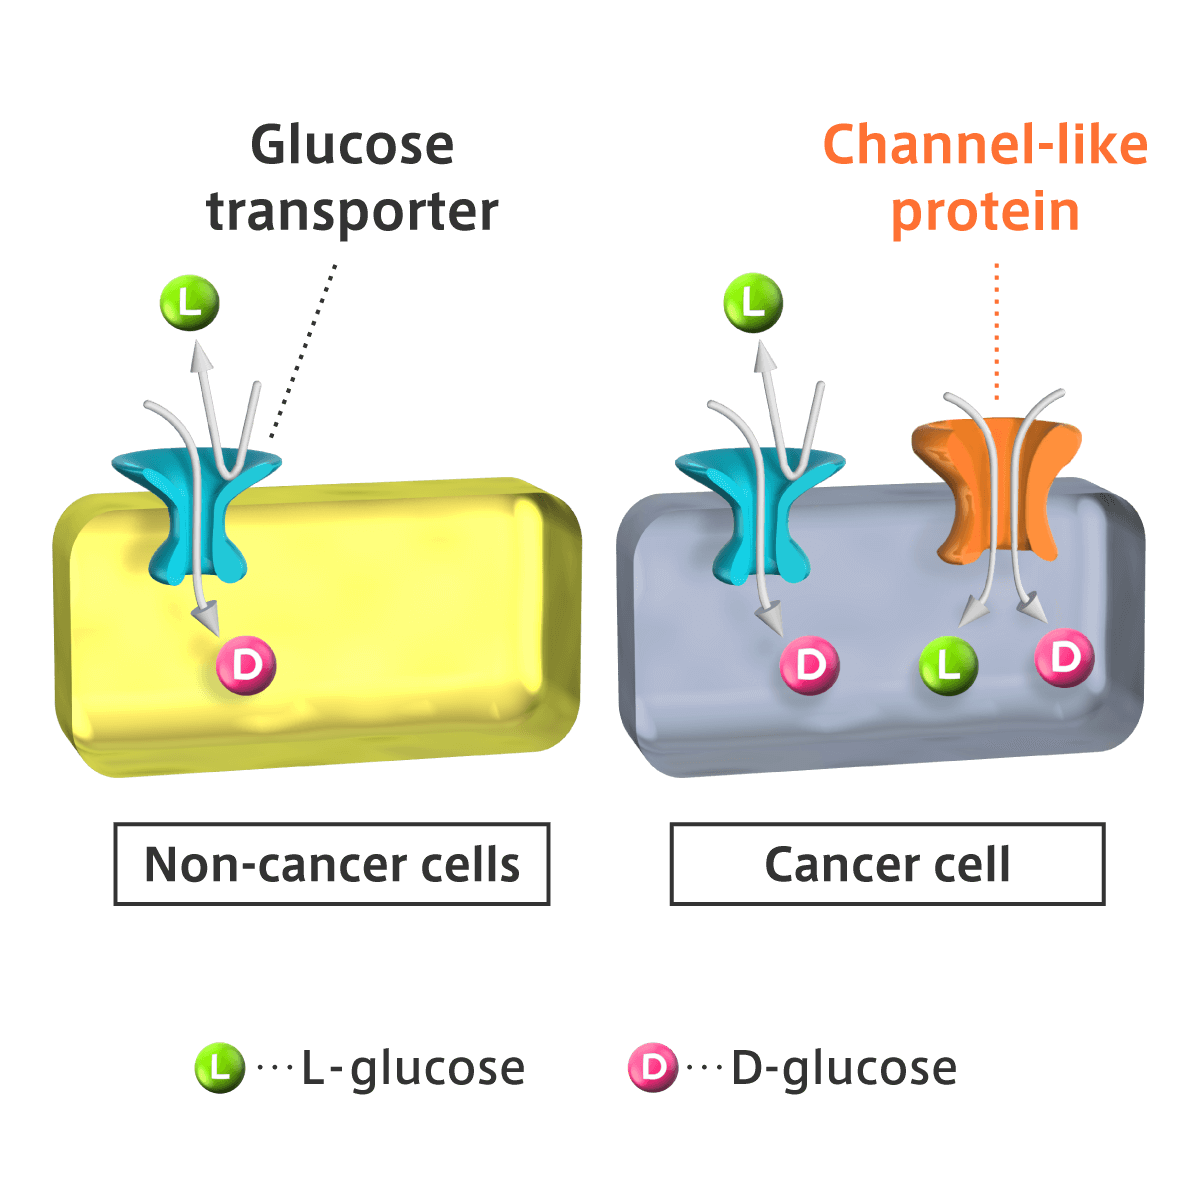 Only cancer cells take up L-glucose